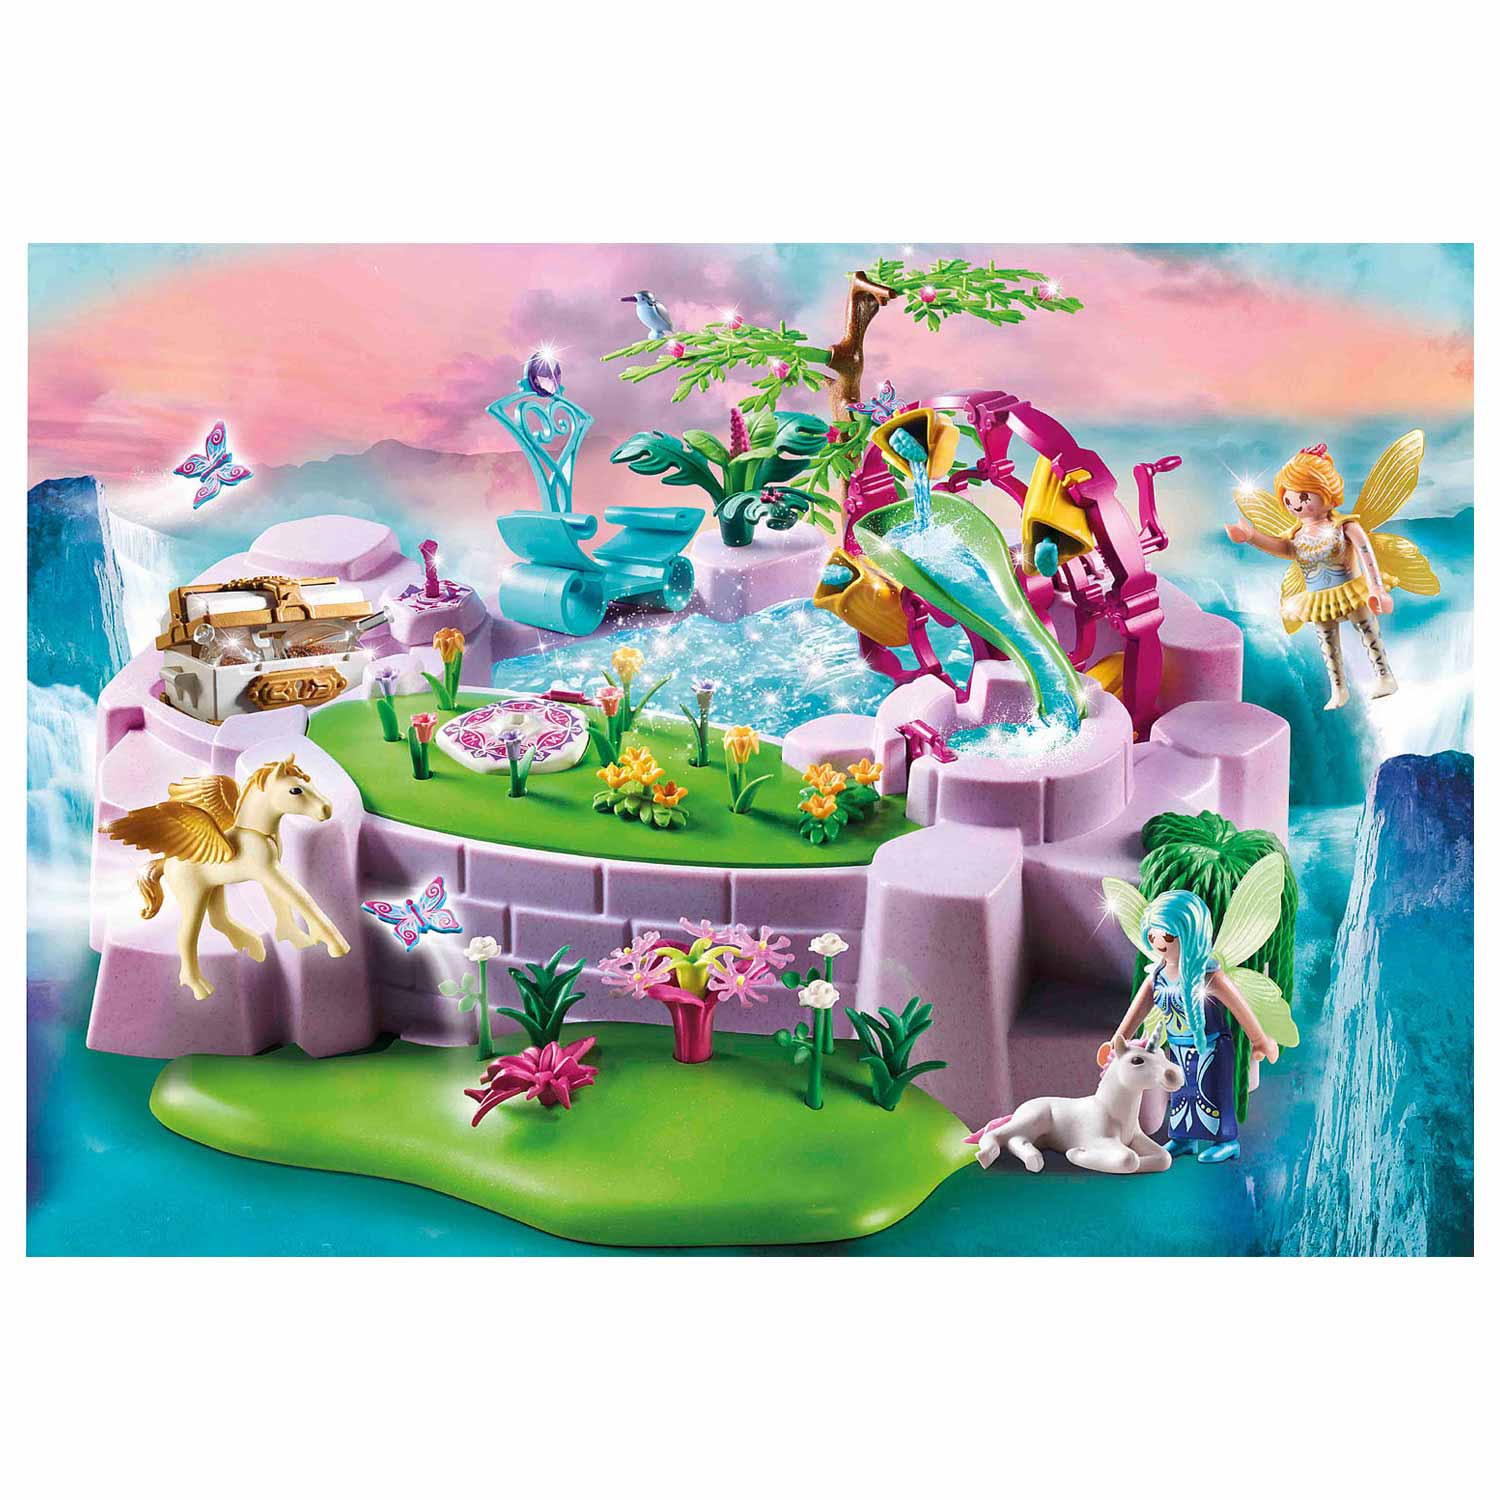 PLAYMOBIL SPECIAL PLUS 70379 FAIRIES AND UNICORN RESEARCHER